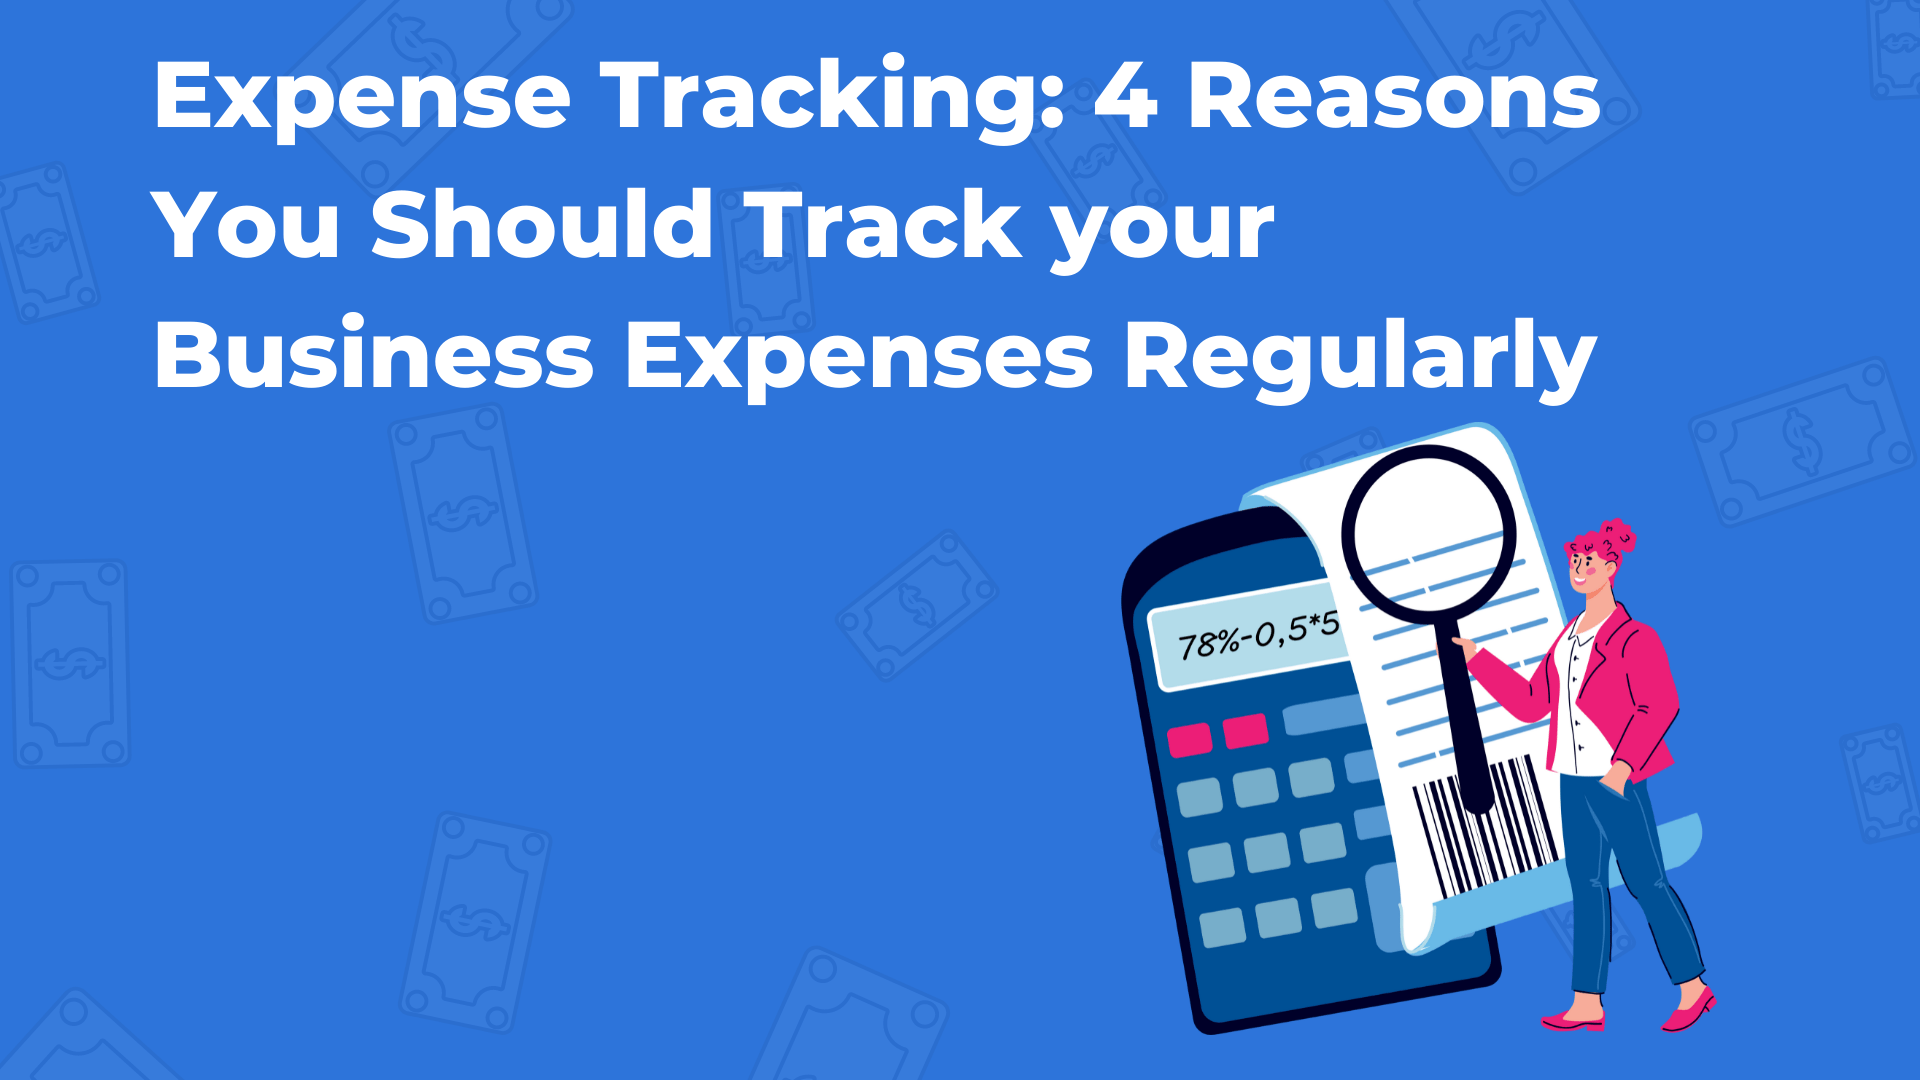 Expense Tracking: 4 Reasons You Should Track Your Business Expenses Regularly